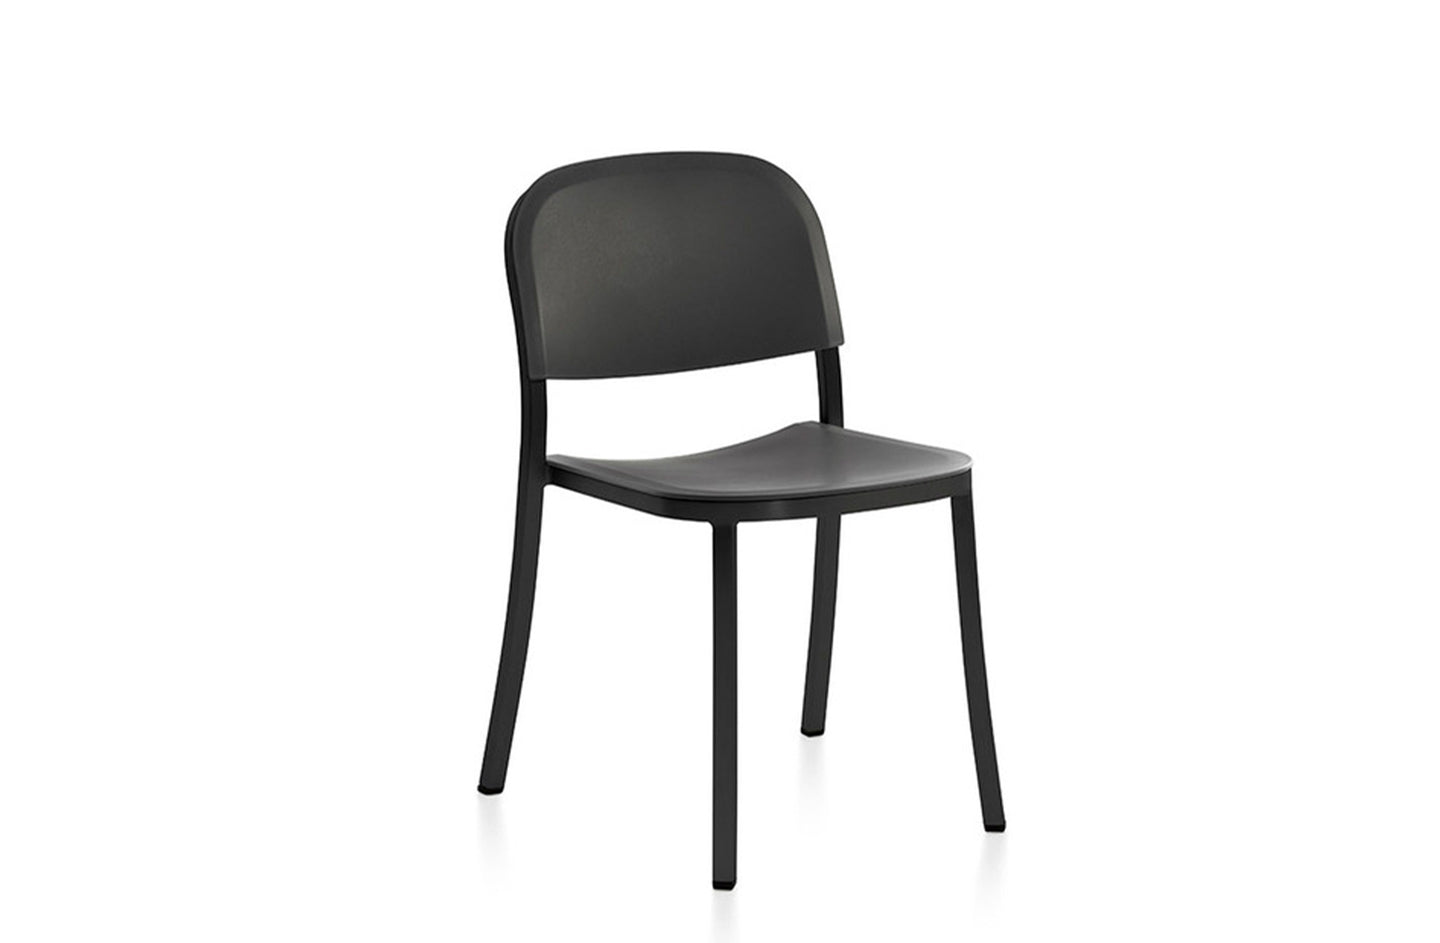 1 Inch Chair
